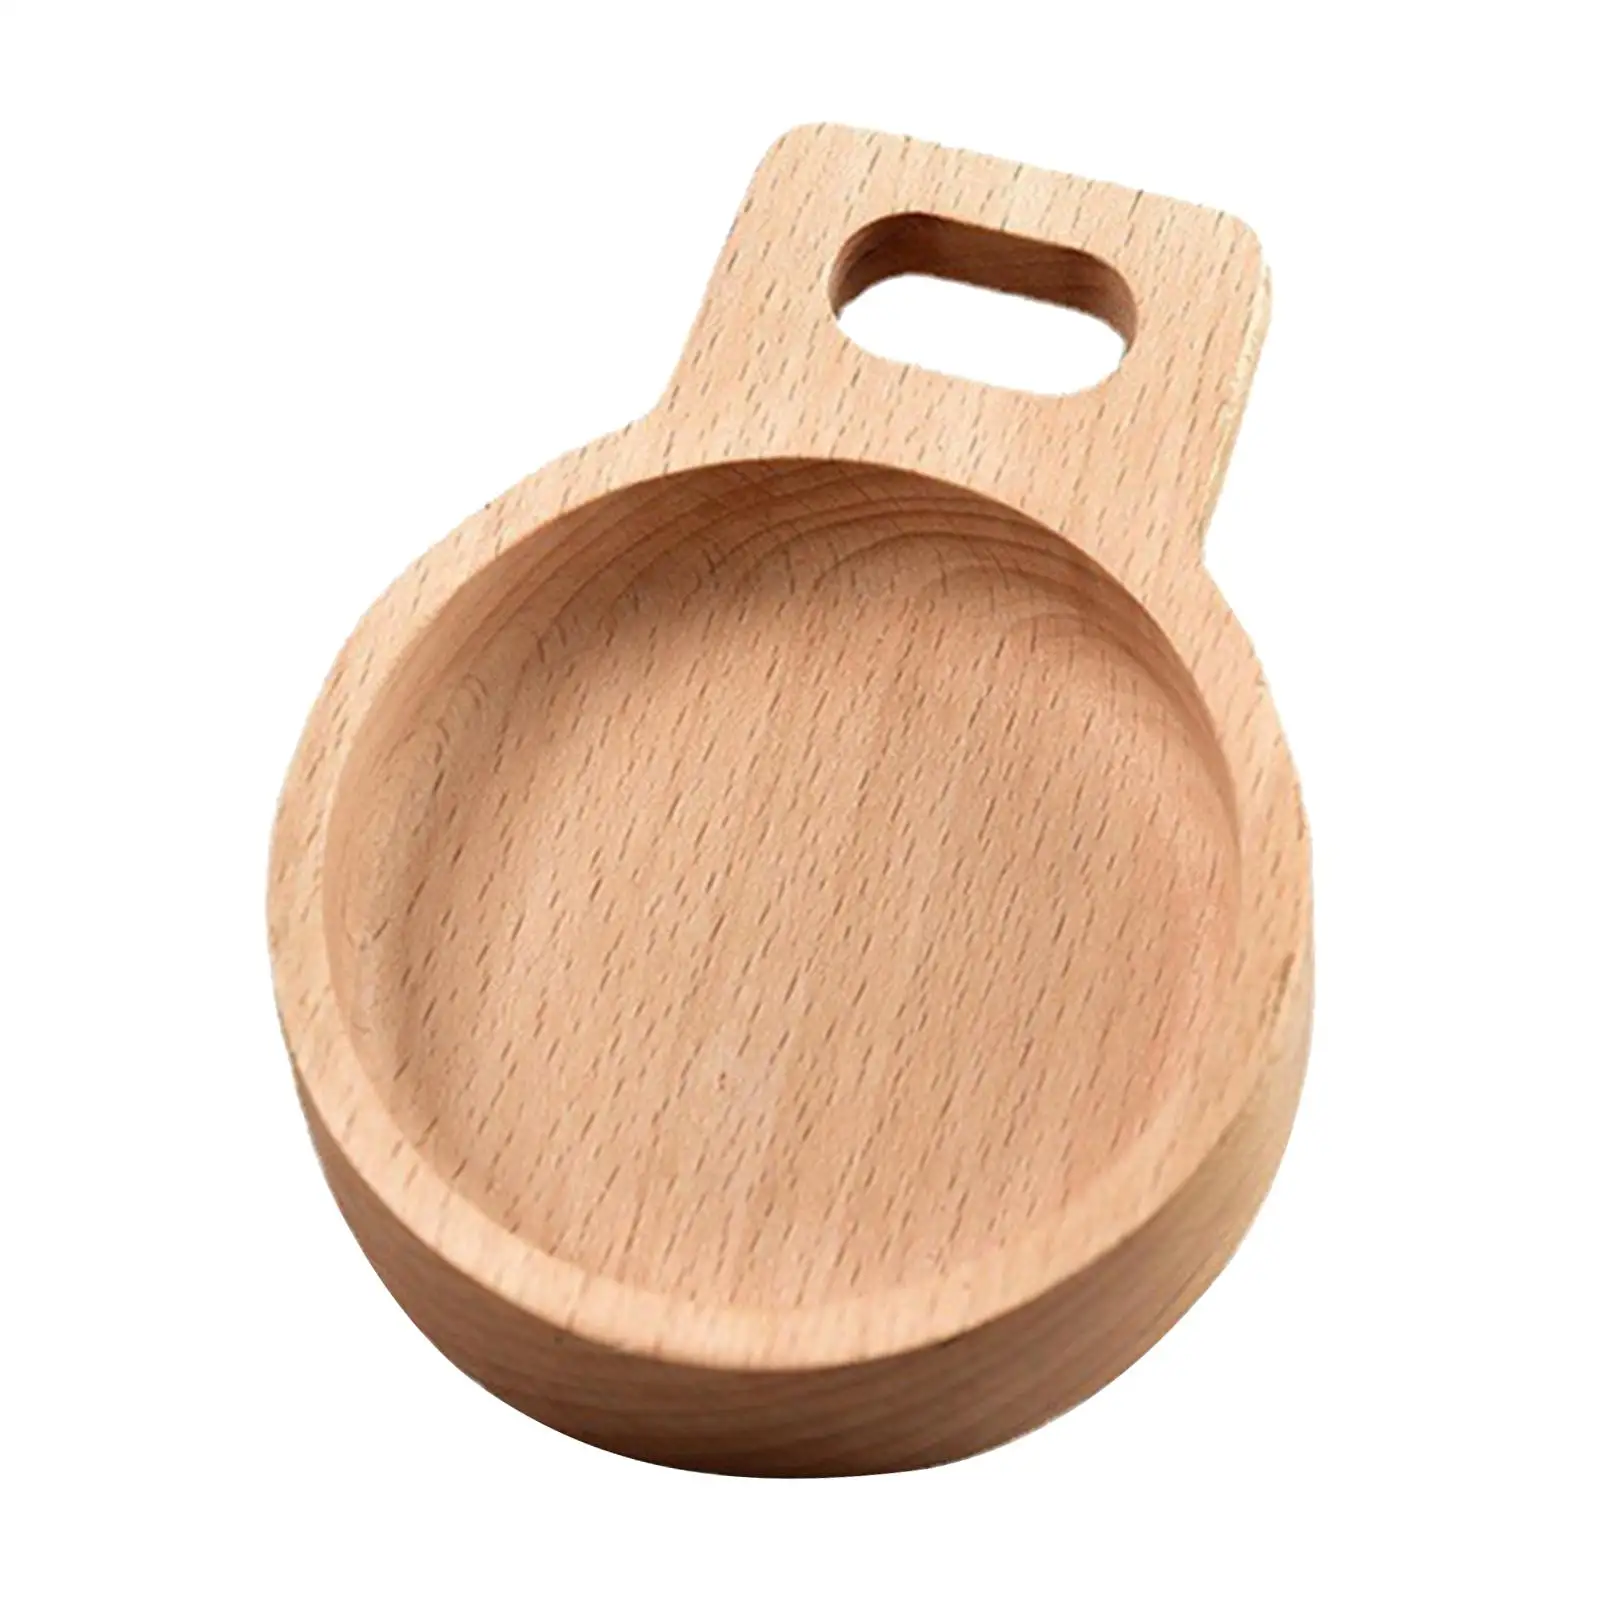 Dip Bowl Reusable Japanese Style Wooden Ketchup Saucer Sauce Dish Condiment Container for Appetizer Kitchen BBQ Salad Tomato